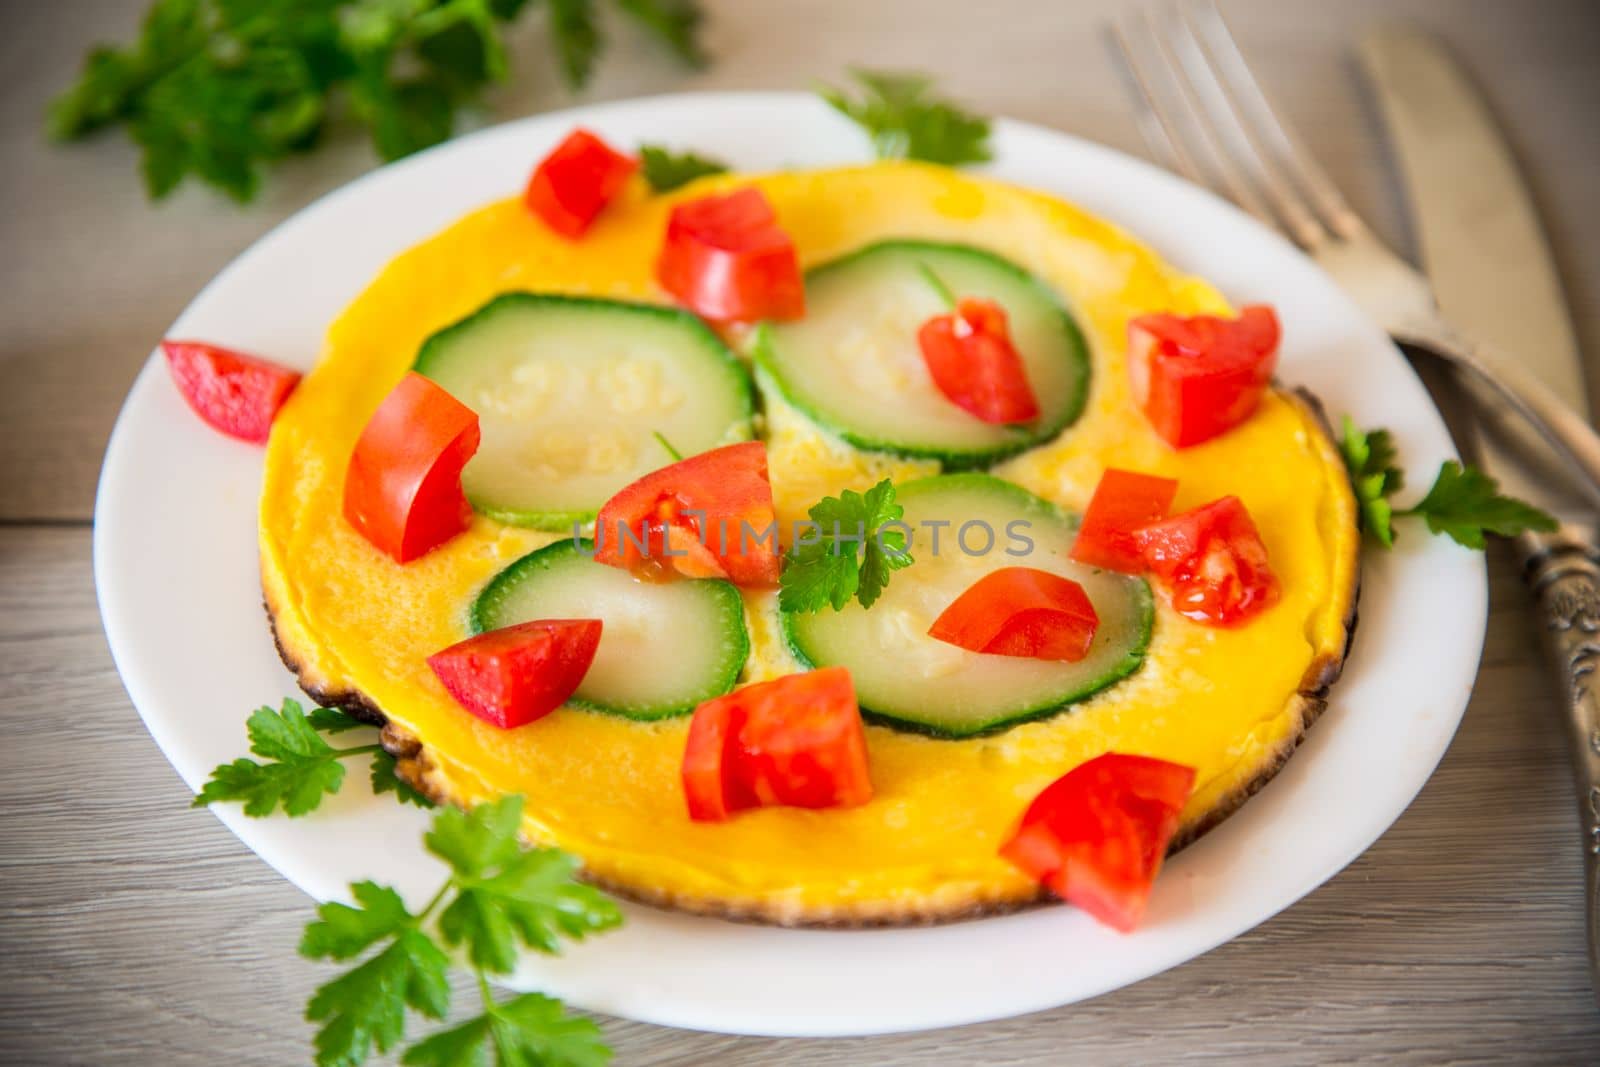 Fried omelet with zucchini, tomatoes, herbs in a plate on a wooden table.